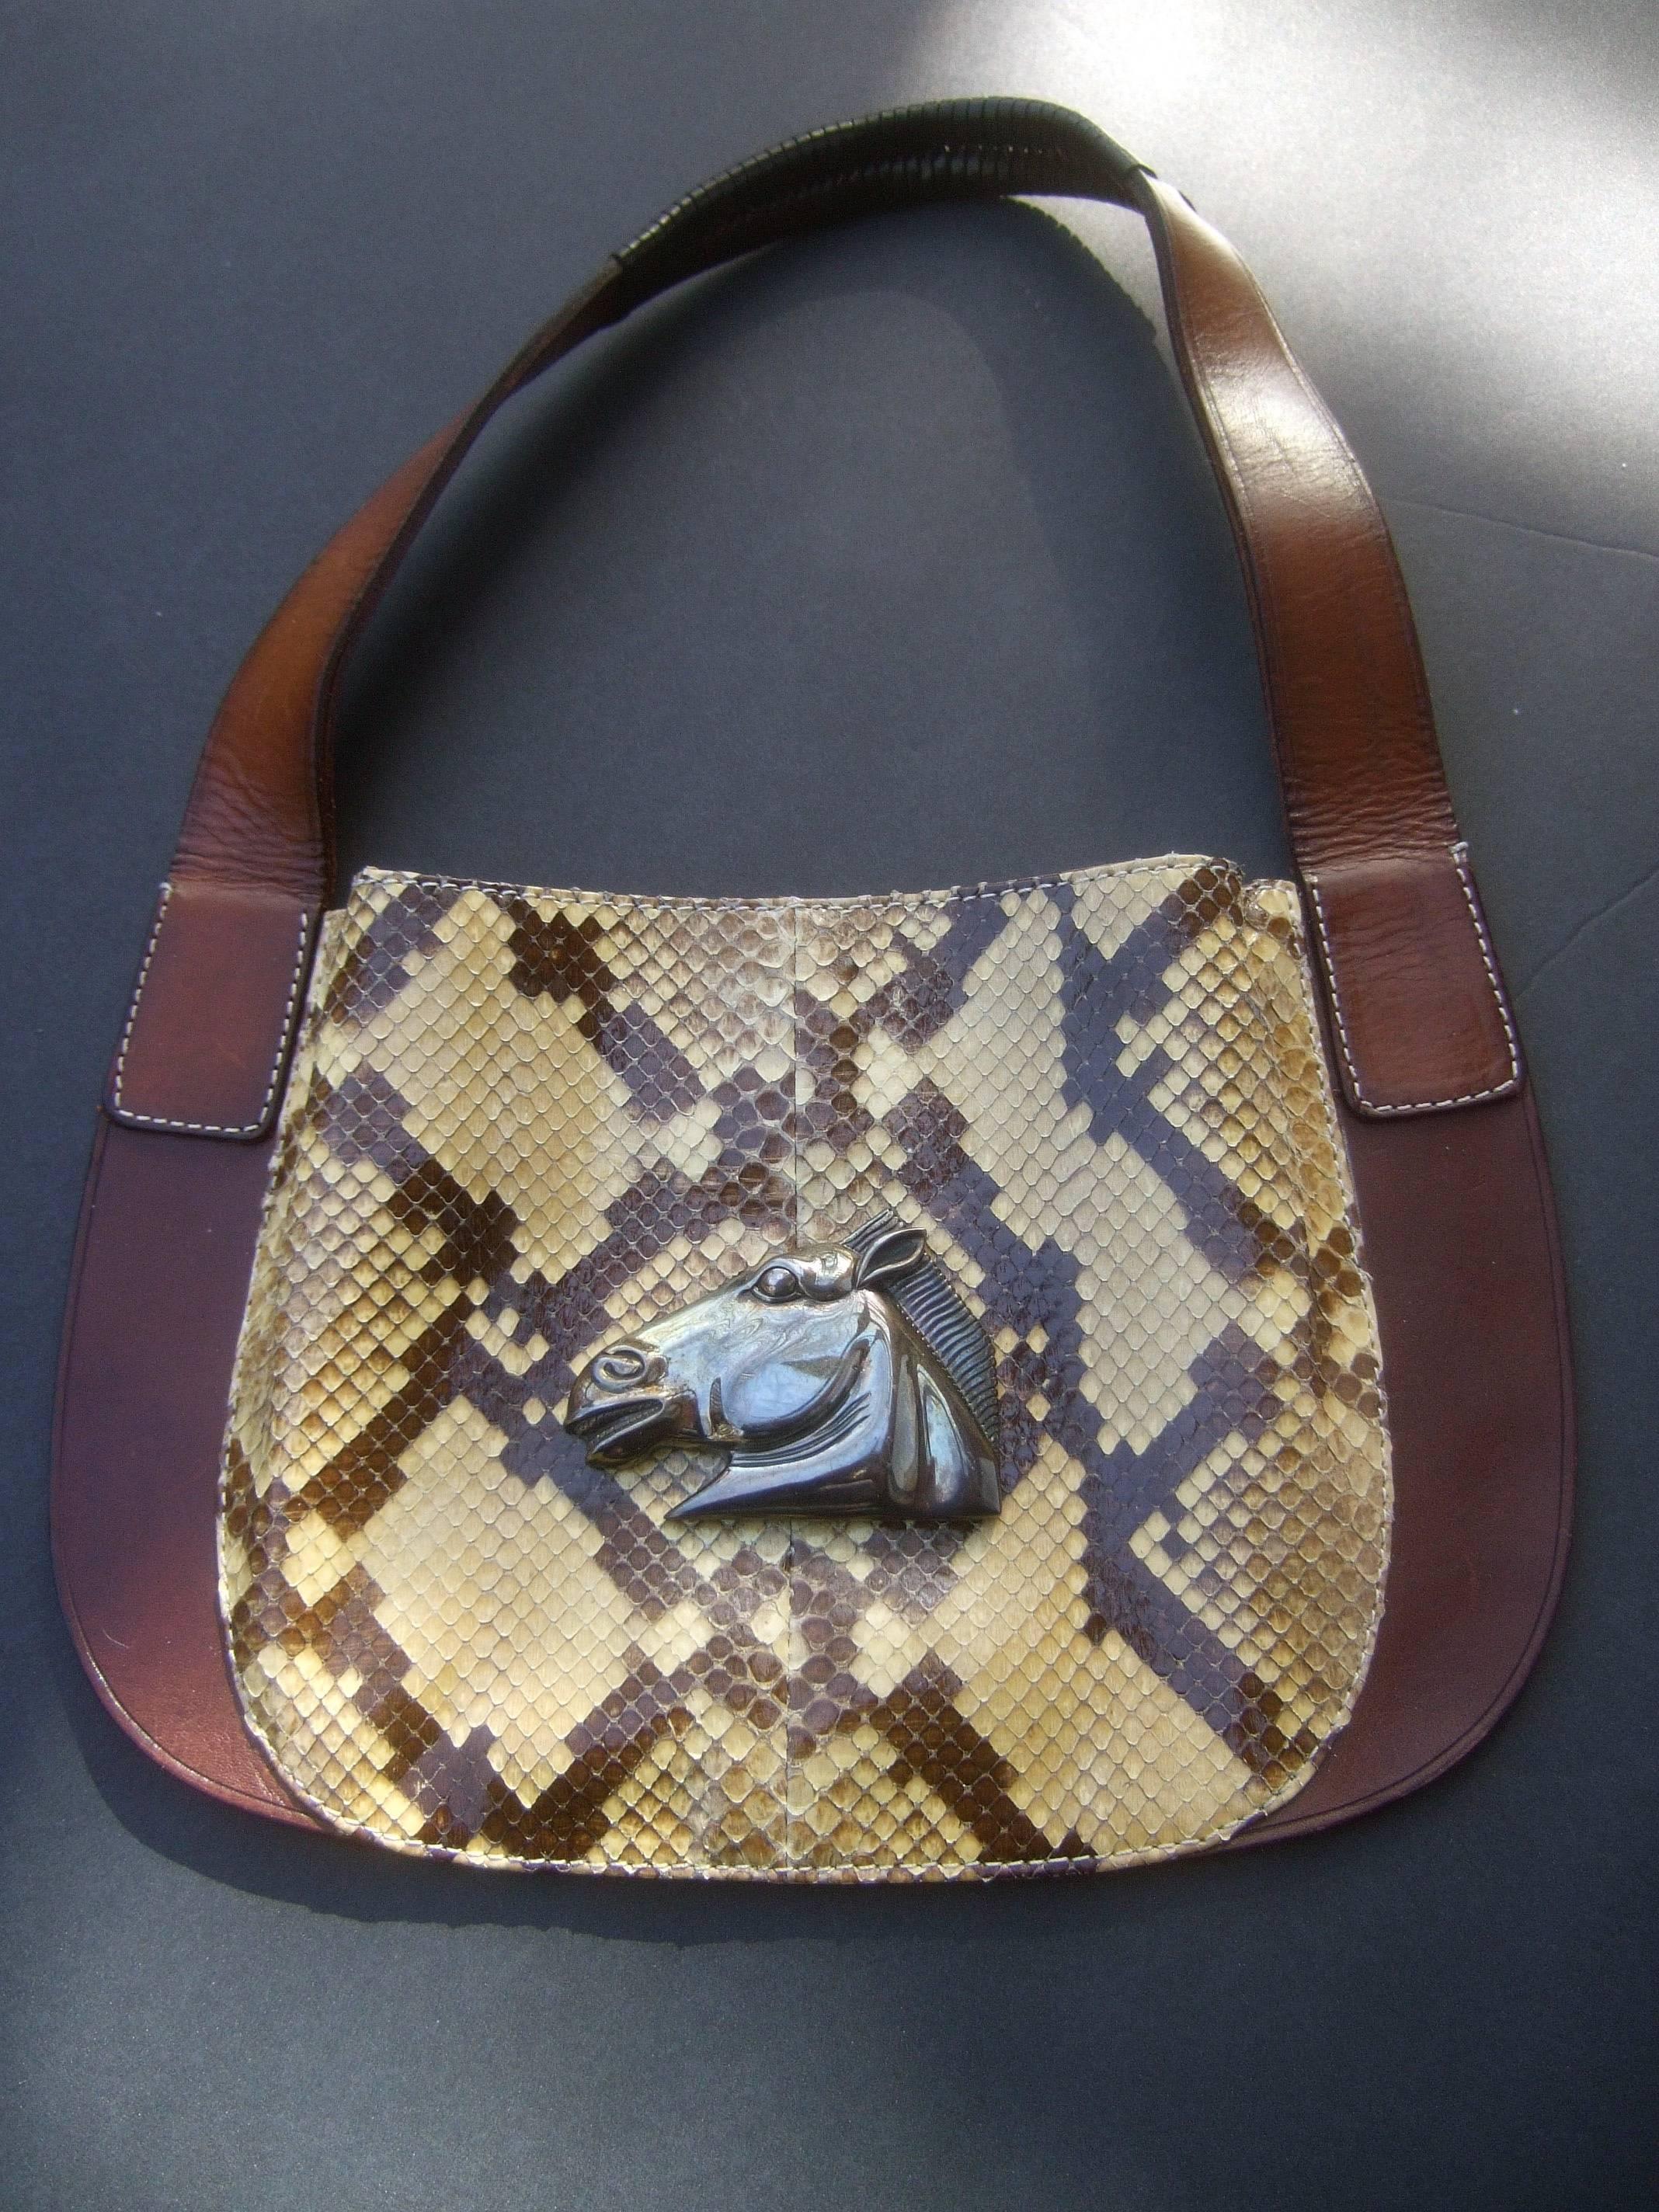 Barry Kieselstein-Cord Sterling Equine Emblem Diminutive Handbag c 1991  In Good Condition In University City, MO